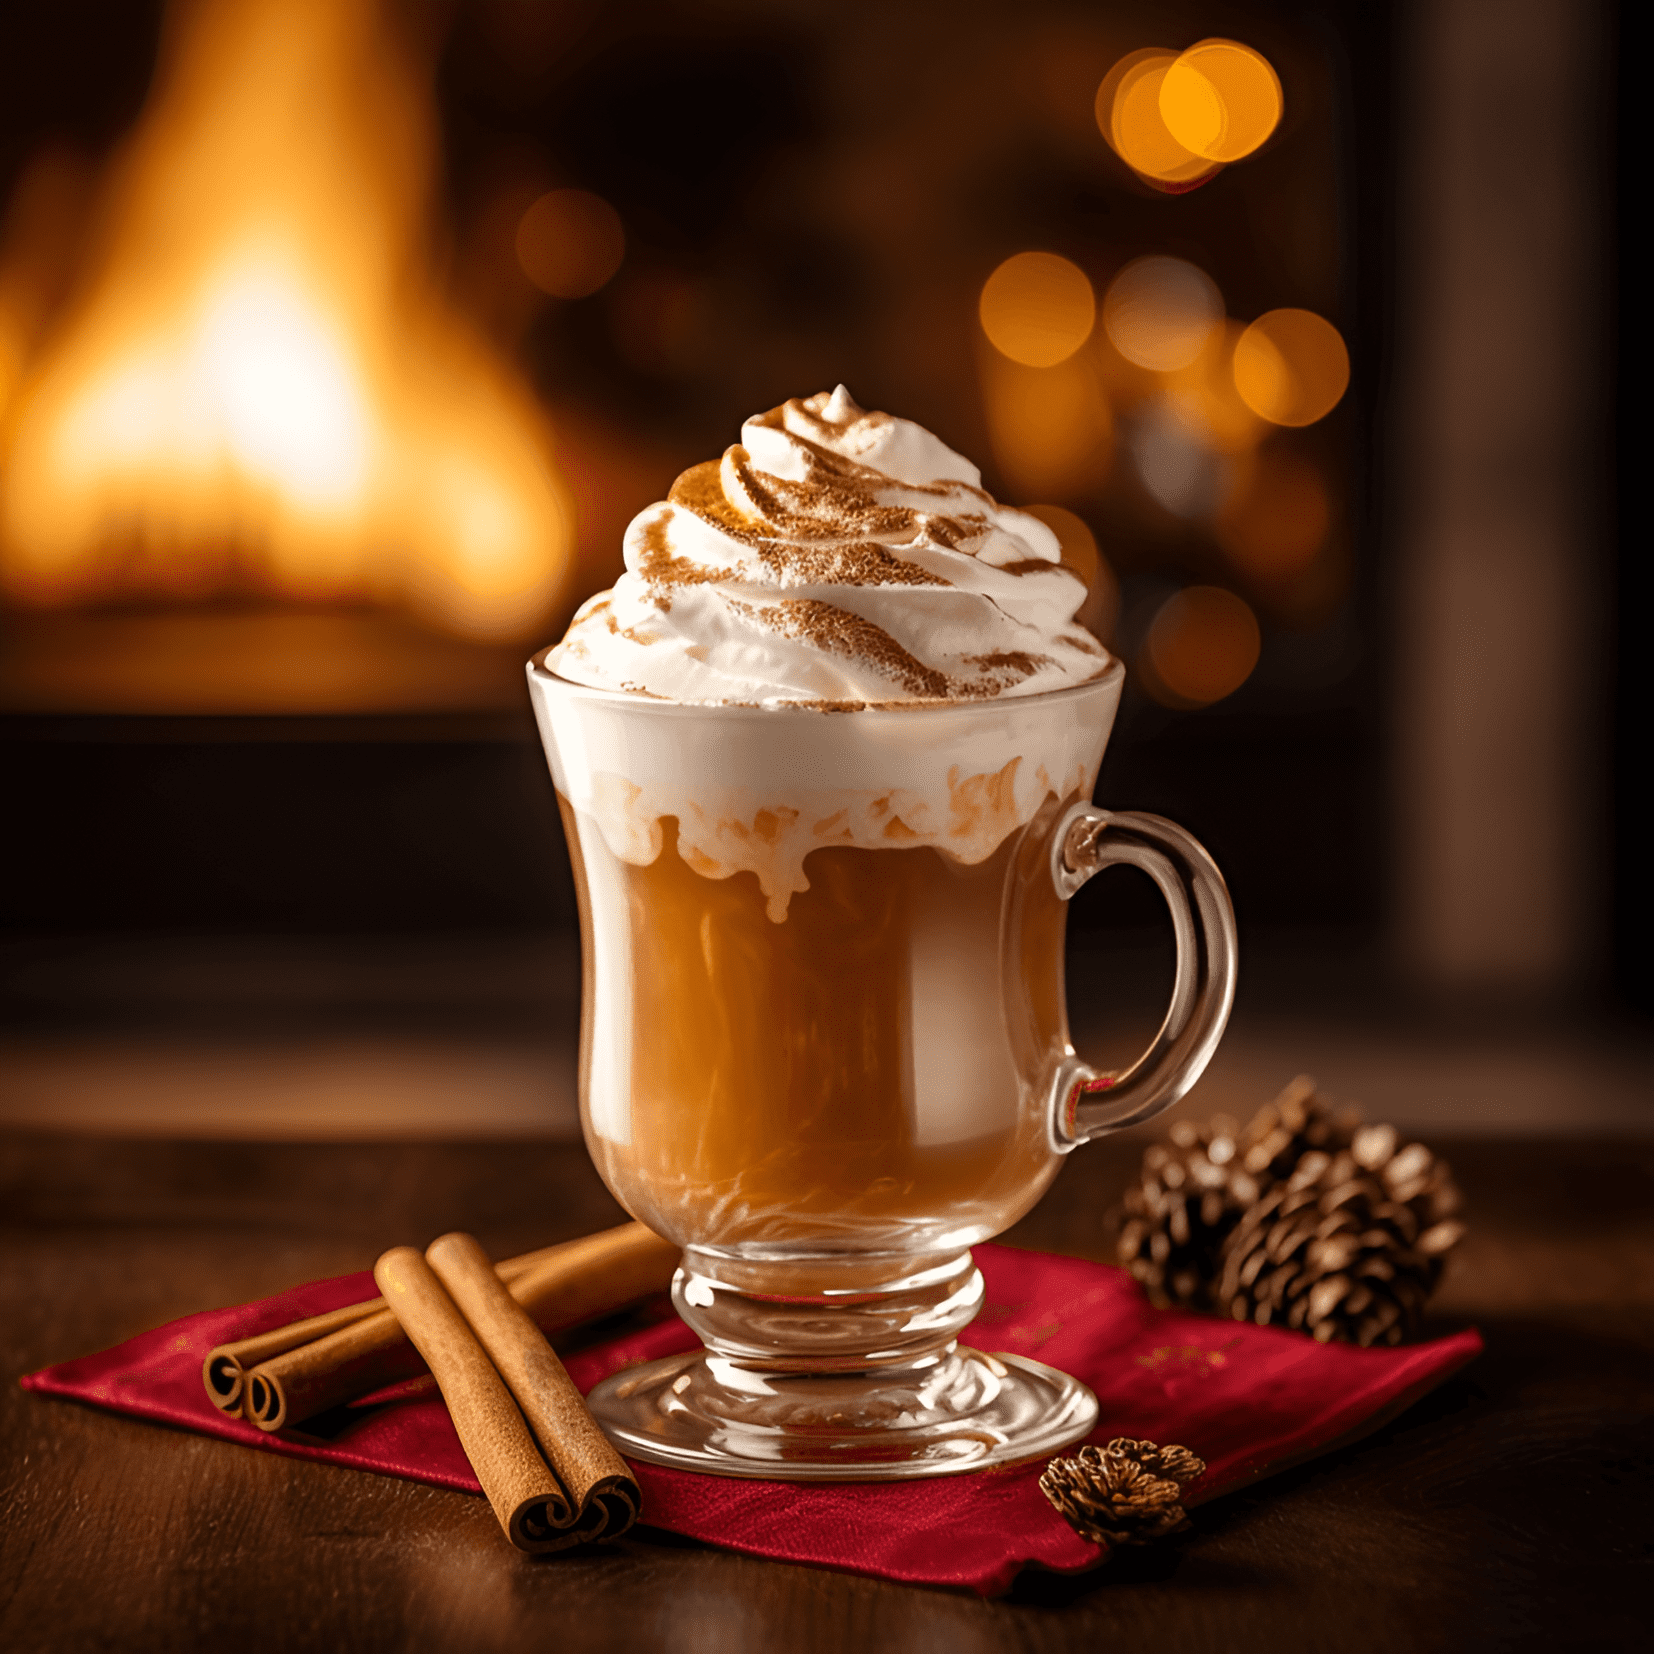 Hot Buttered Rum has a rich, creamy, and buttery taste with a hint of sweetness from the brown sugar and a warming sensation from the spices and rum. The flavors are well-balanced, making it a perfect winter cocktail.